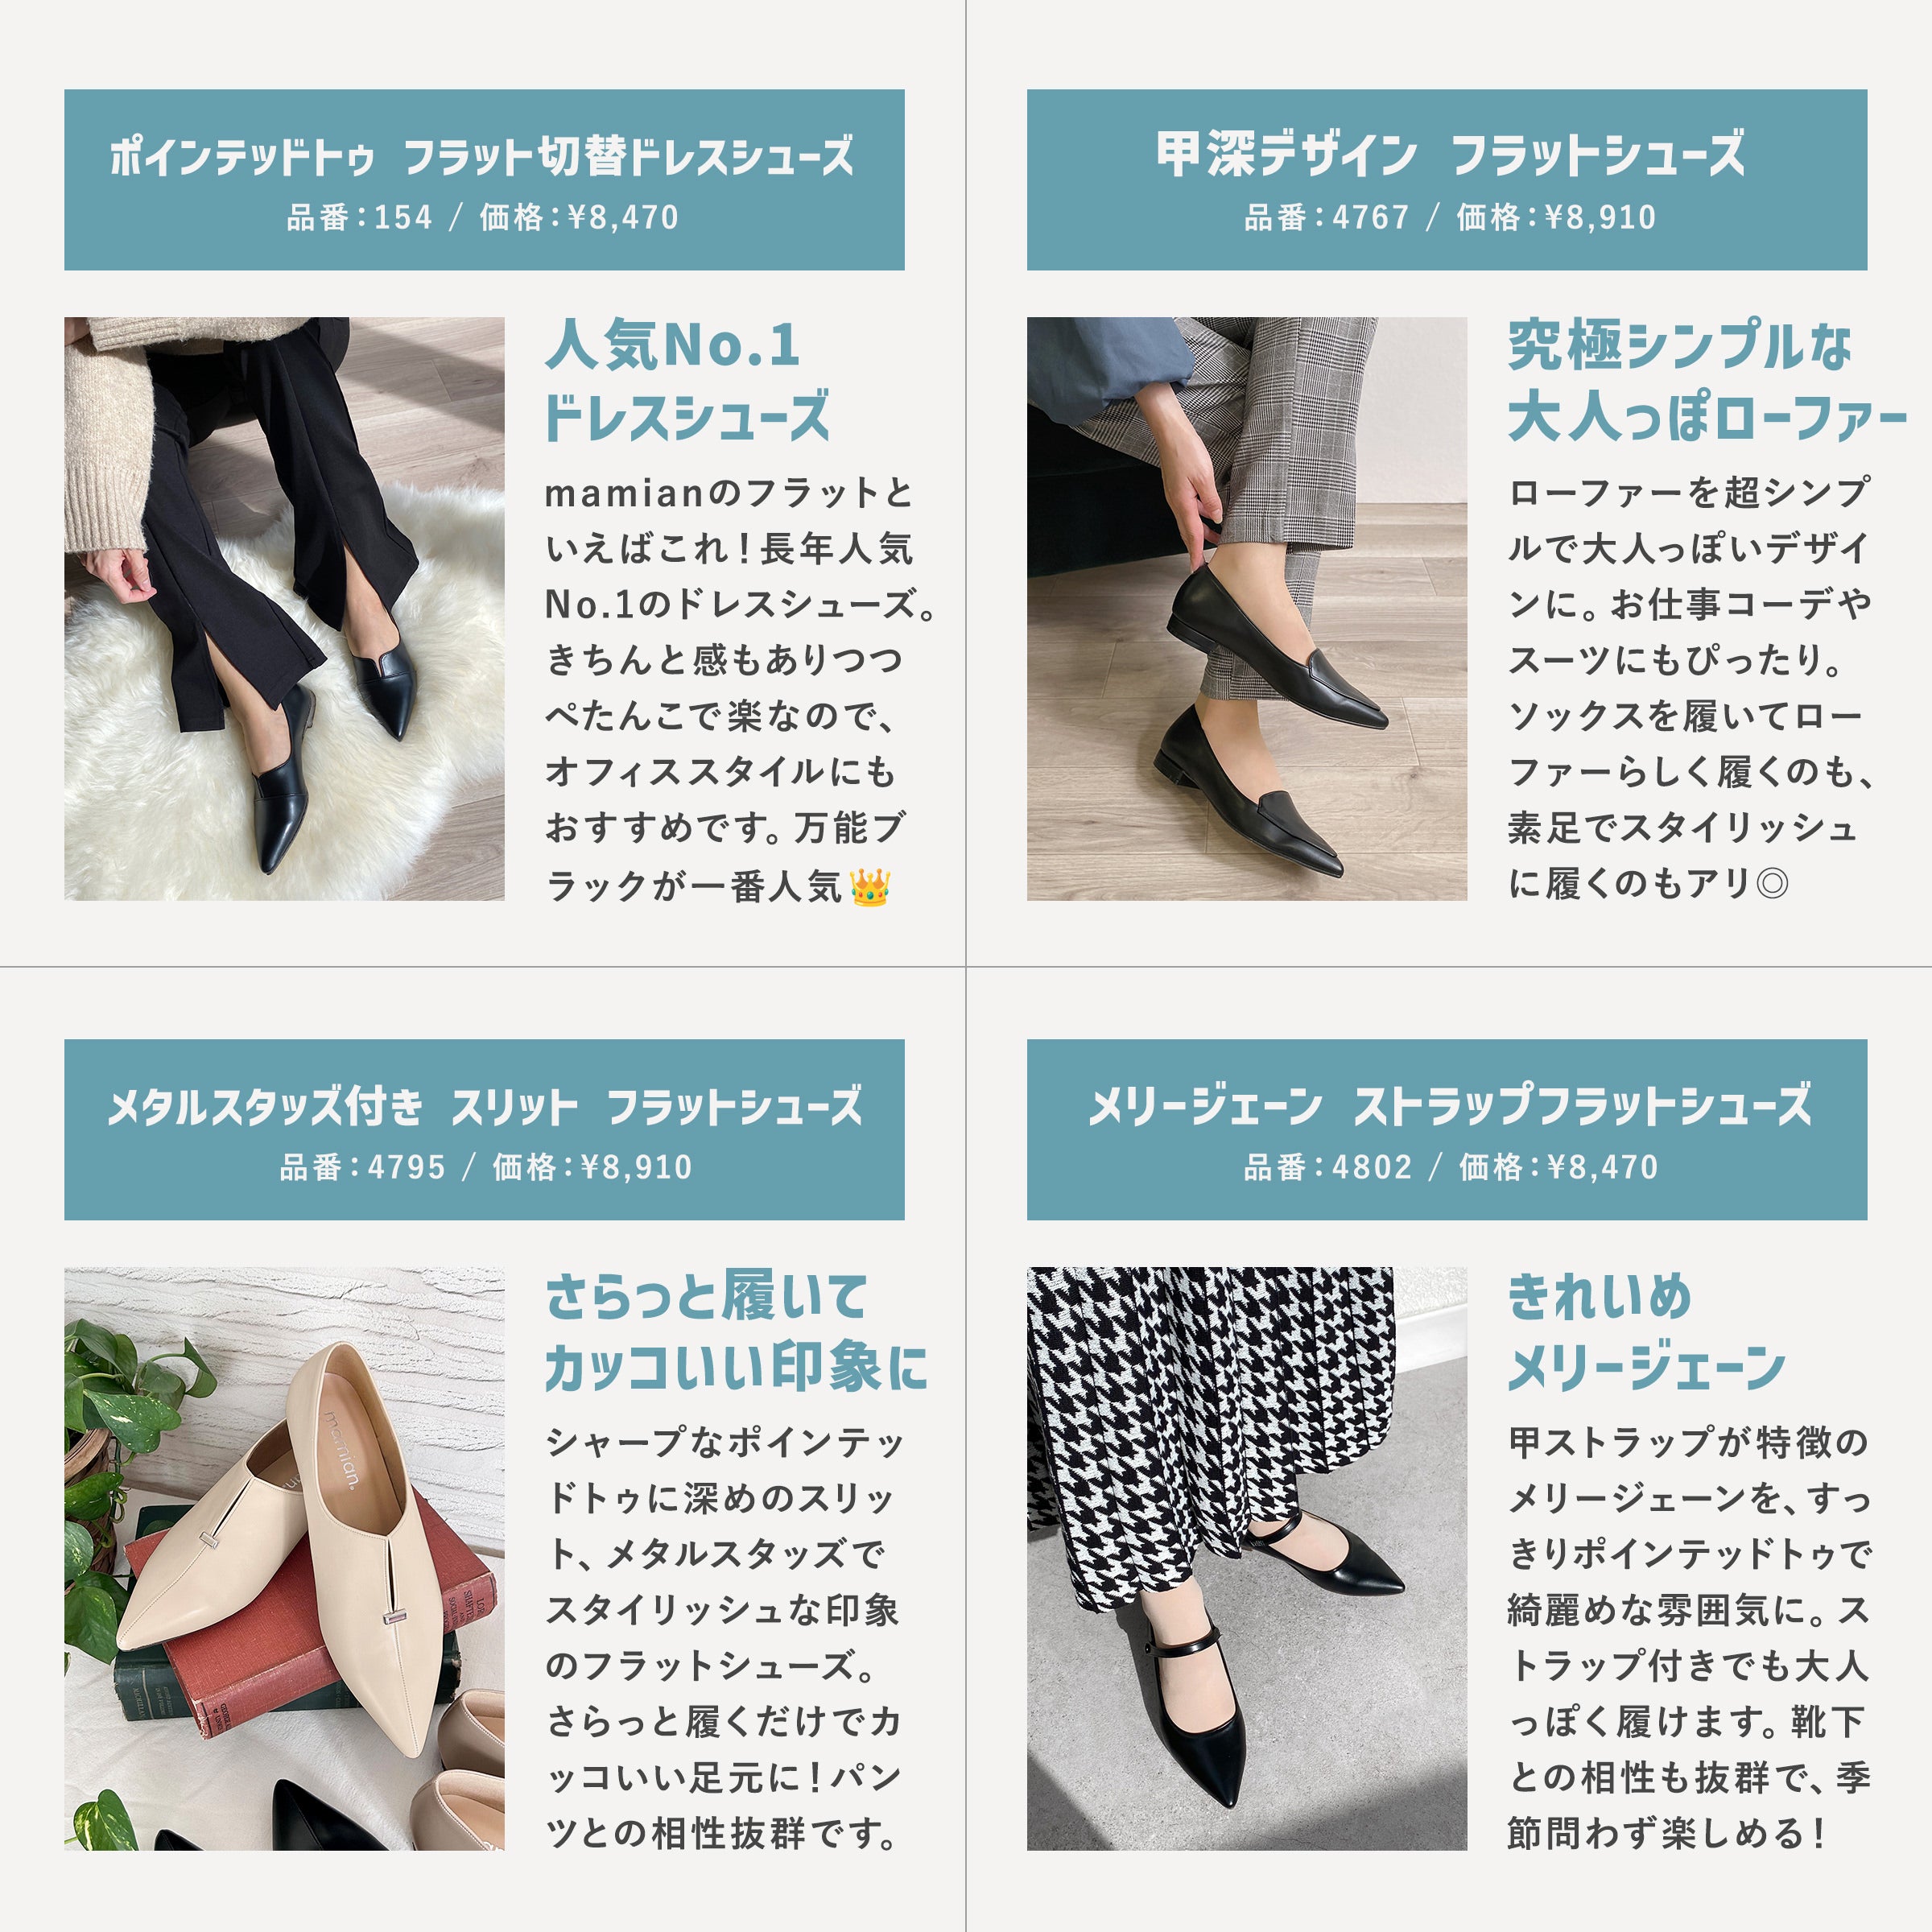 You can wear it neatly! New flat shoes feature